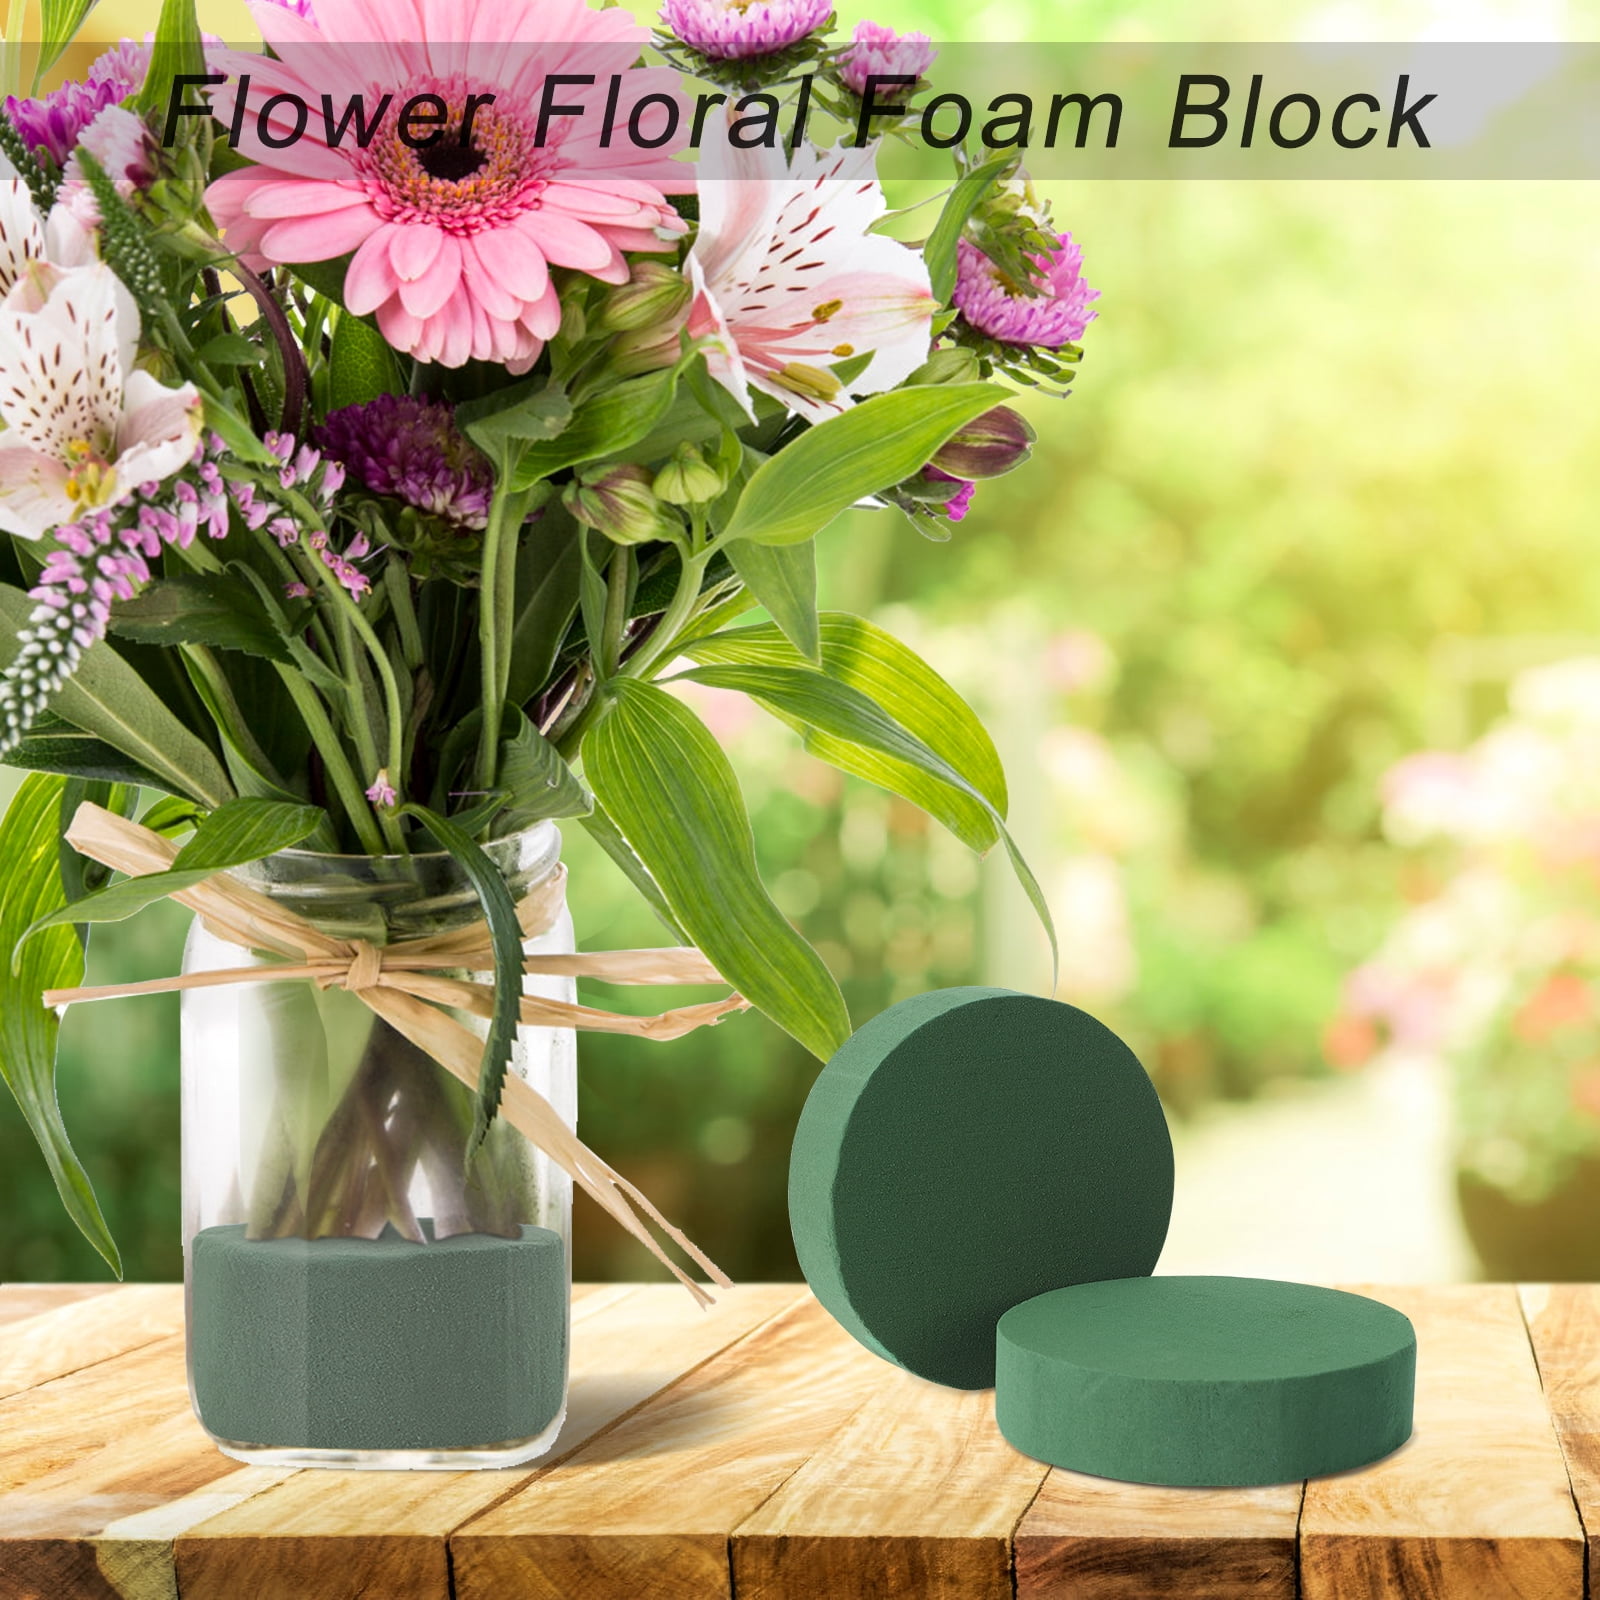 Pack of 6 FLOFARE Round Floral Foam Blocks for Fresh and Artificial  Flowers, (4.5 X 1.5), Dry & Wet Green Flower Foam for Flow